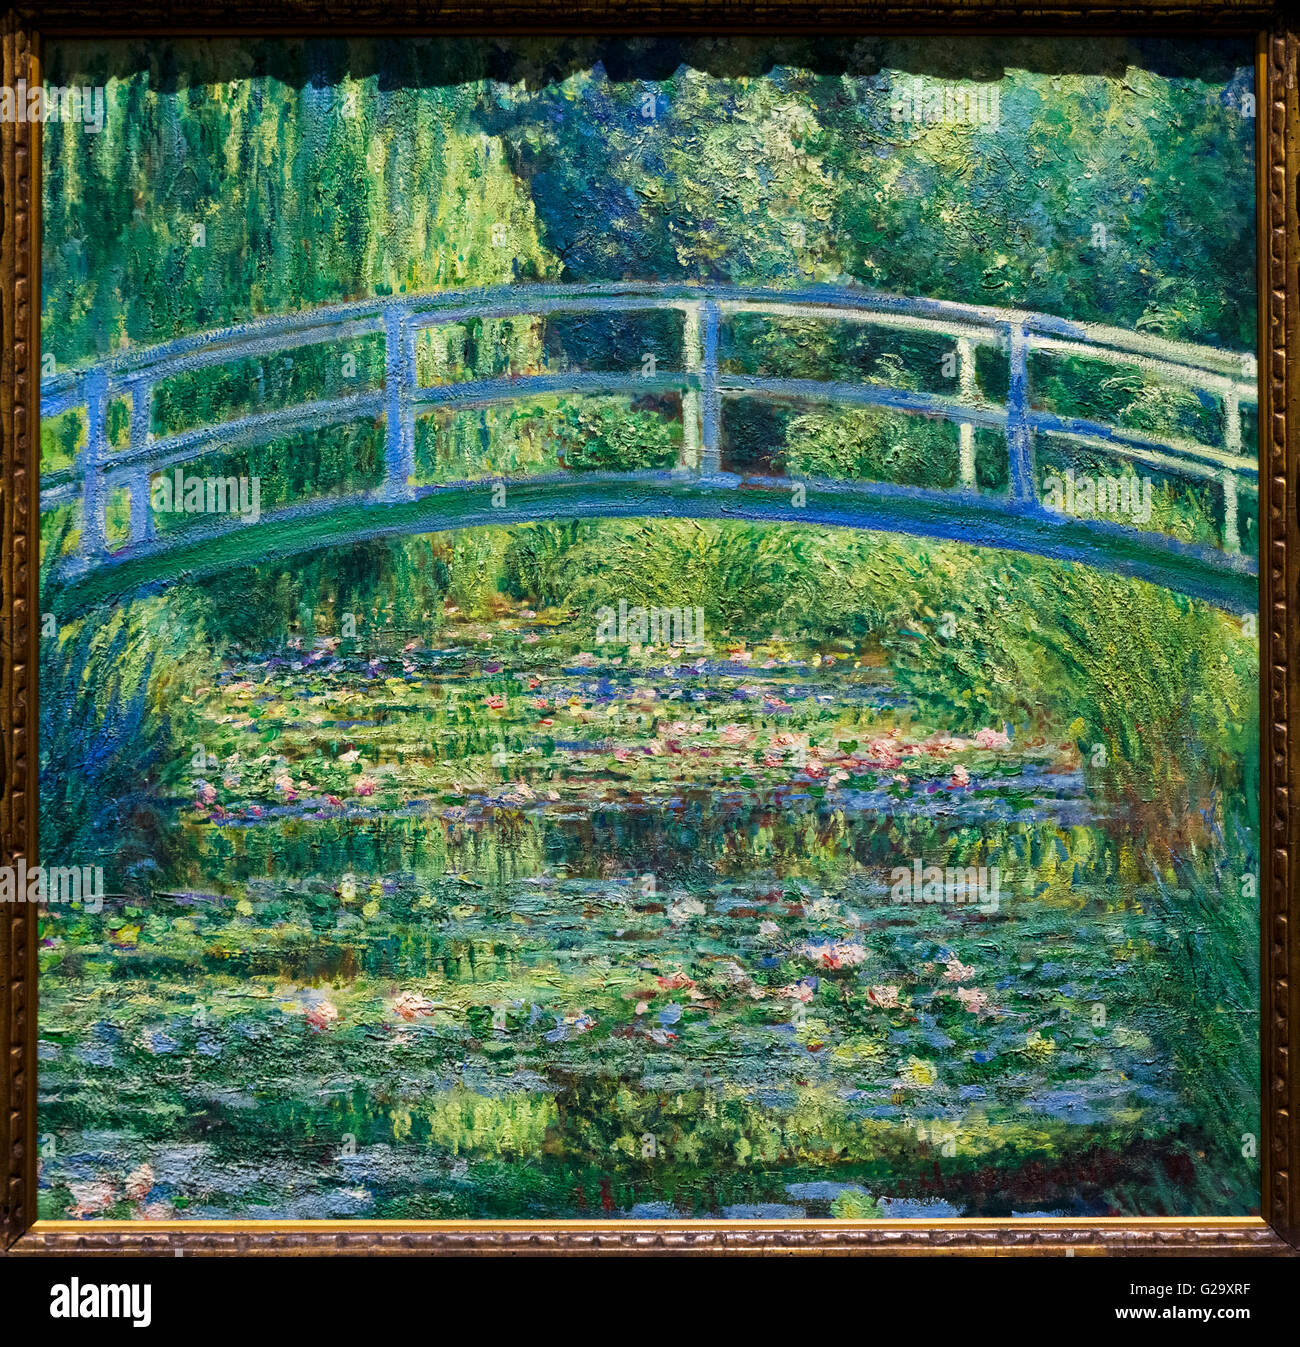 Monet Water Lilies The Water Lily Pond By Claude Monet Oil On Canvas 19 Stock Photo Alamy